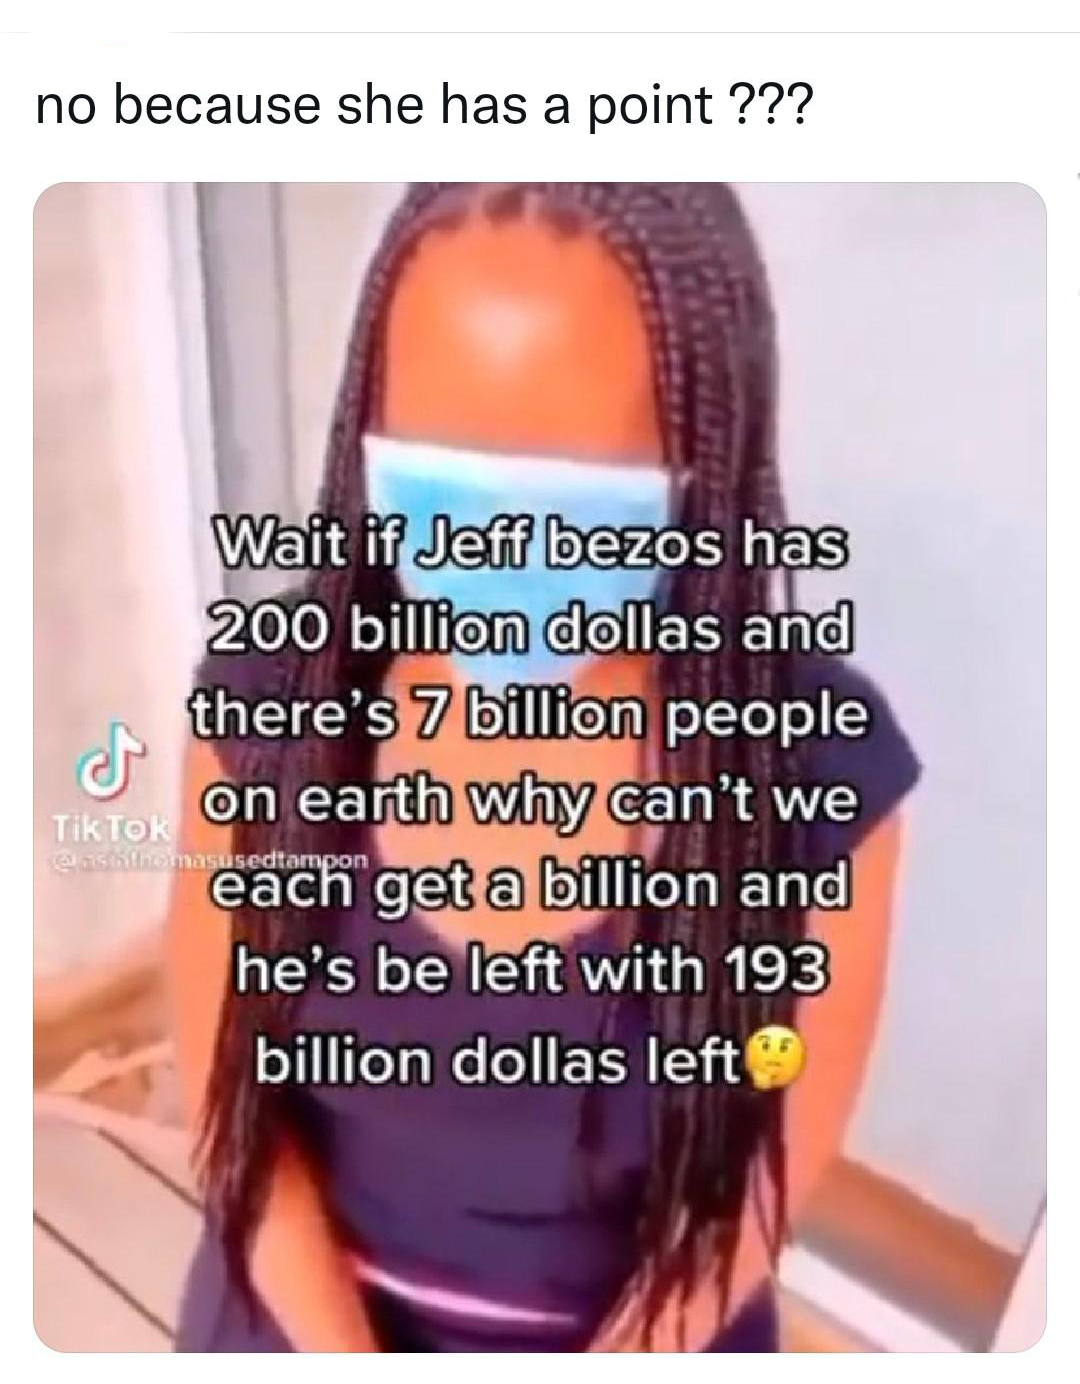 cringeworthy pics - jeff bezos 200 billion 7 billion people - no because she has a point ??? Wait if Jeff bezos has 200 billion dollas and there's 7 billion people TikTOK on earth why can't we each get a billion and he's be left with 193 billion dollas le